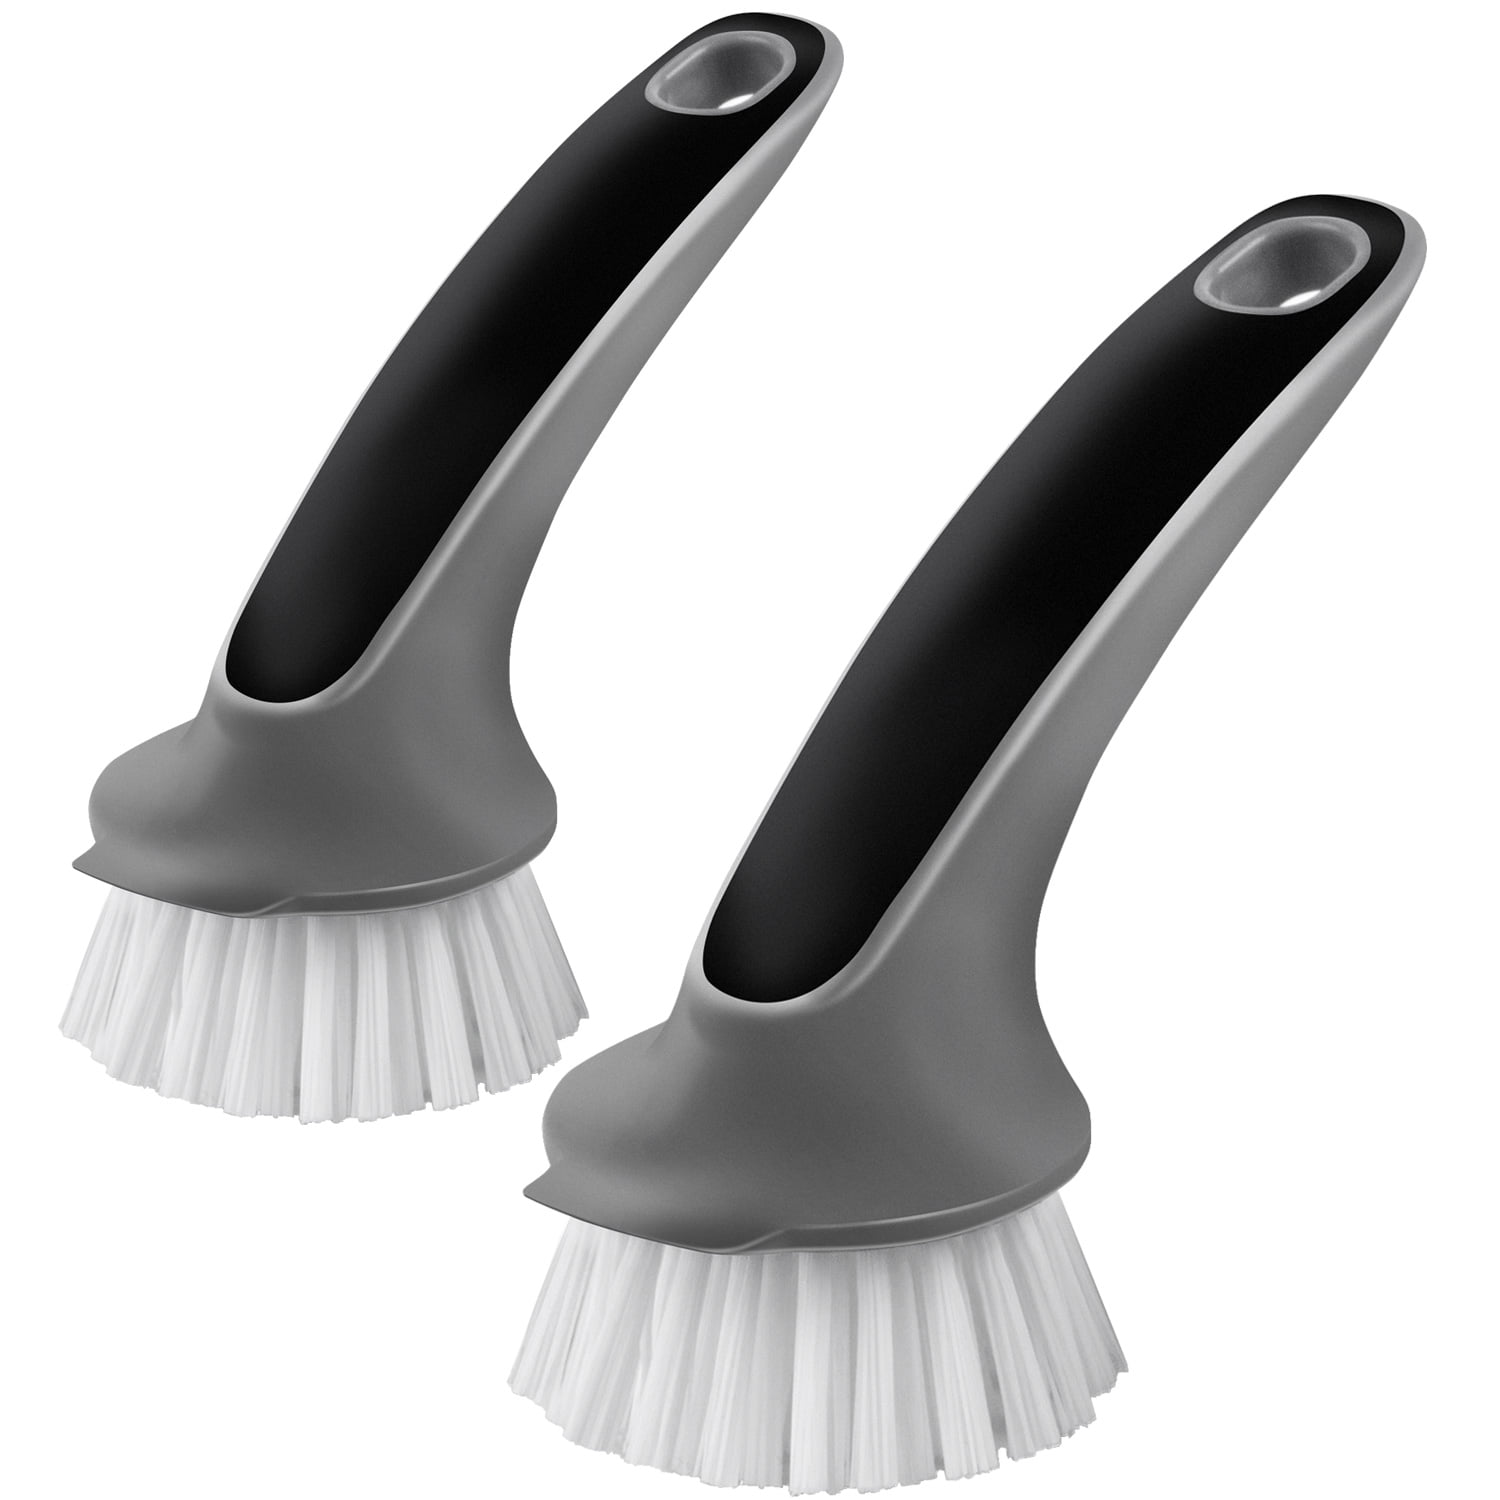  MR.SIGA Dish Brush with Long Handle Built-in Scraper, Scrubbing  Brush for Pans, Pots, Kitchen Sink Cleaning, Pack of 3 : Health & Household